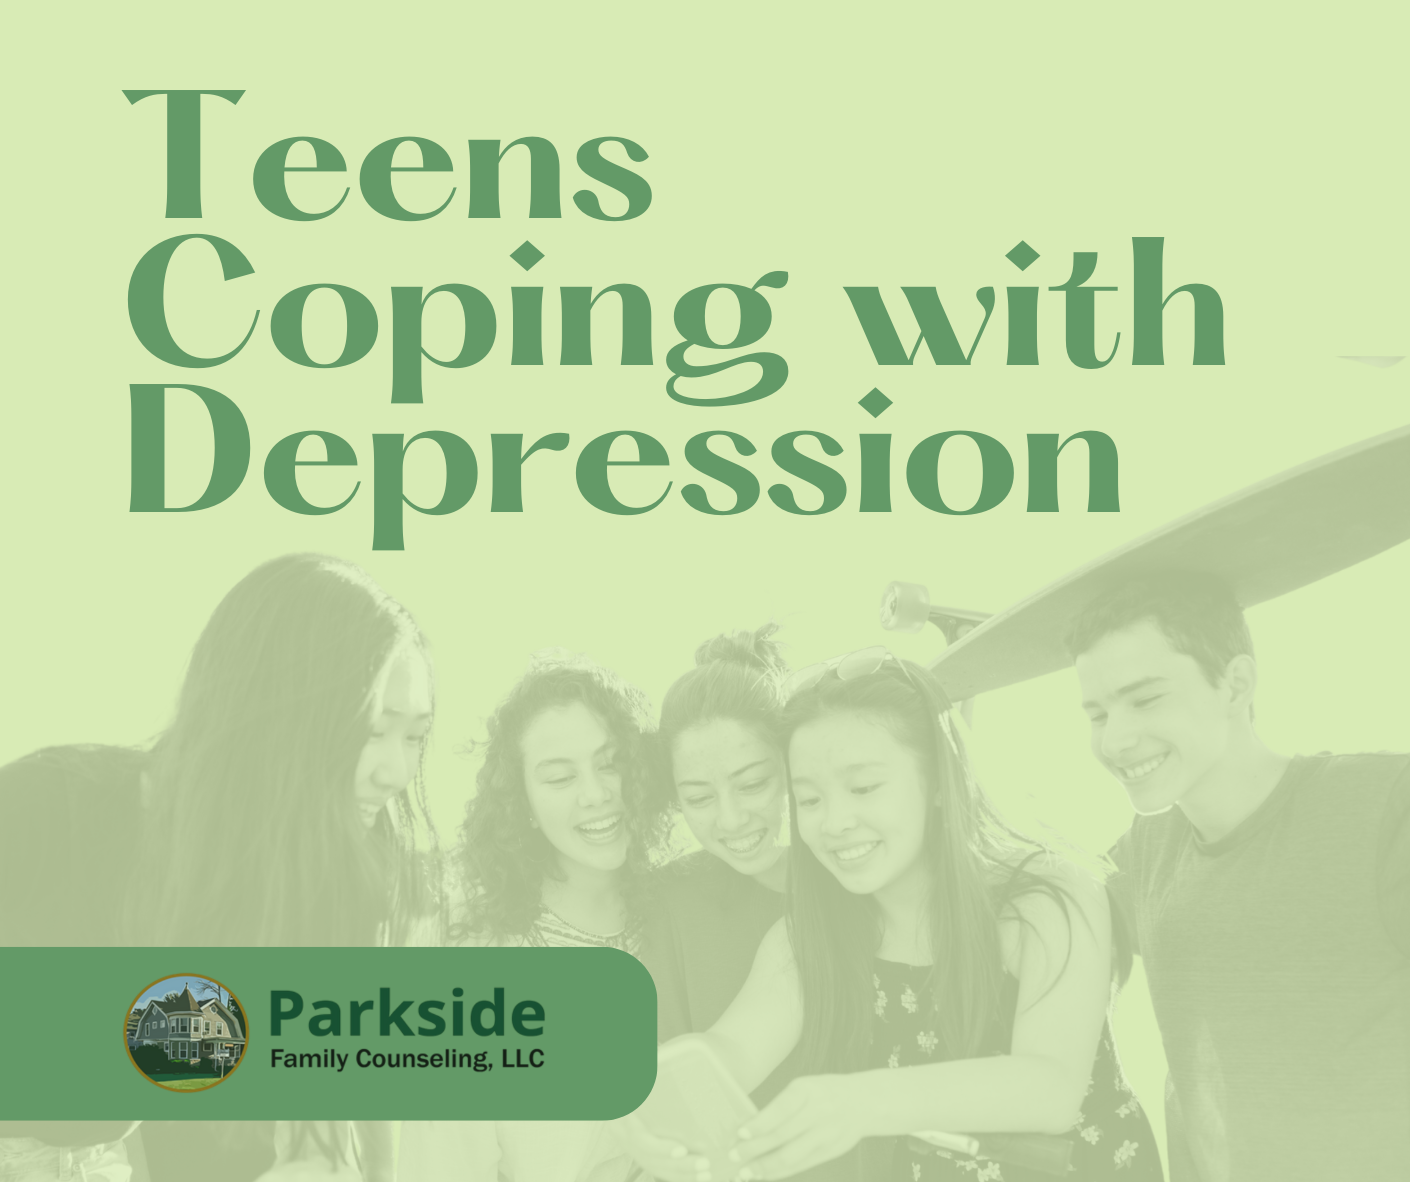 Teens coping with depression group